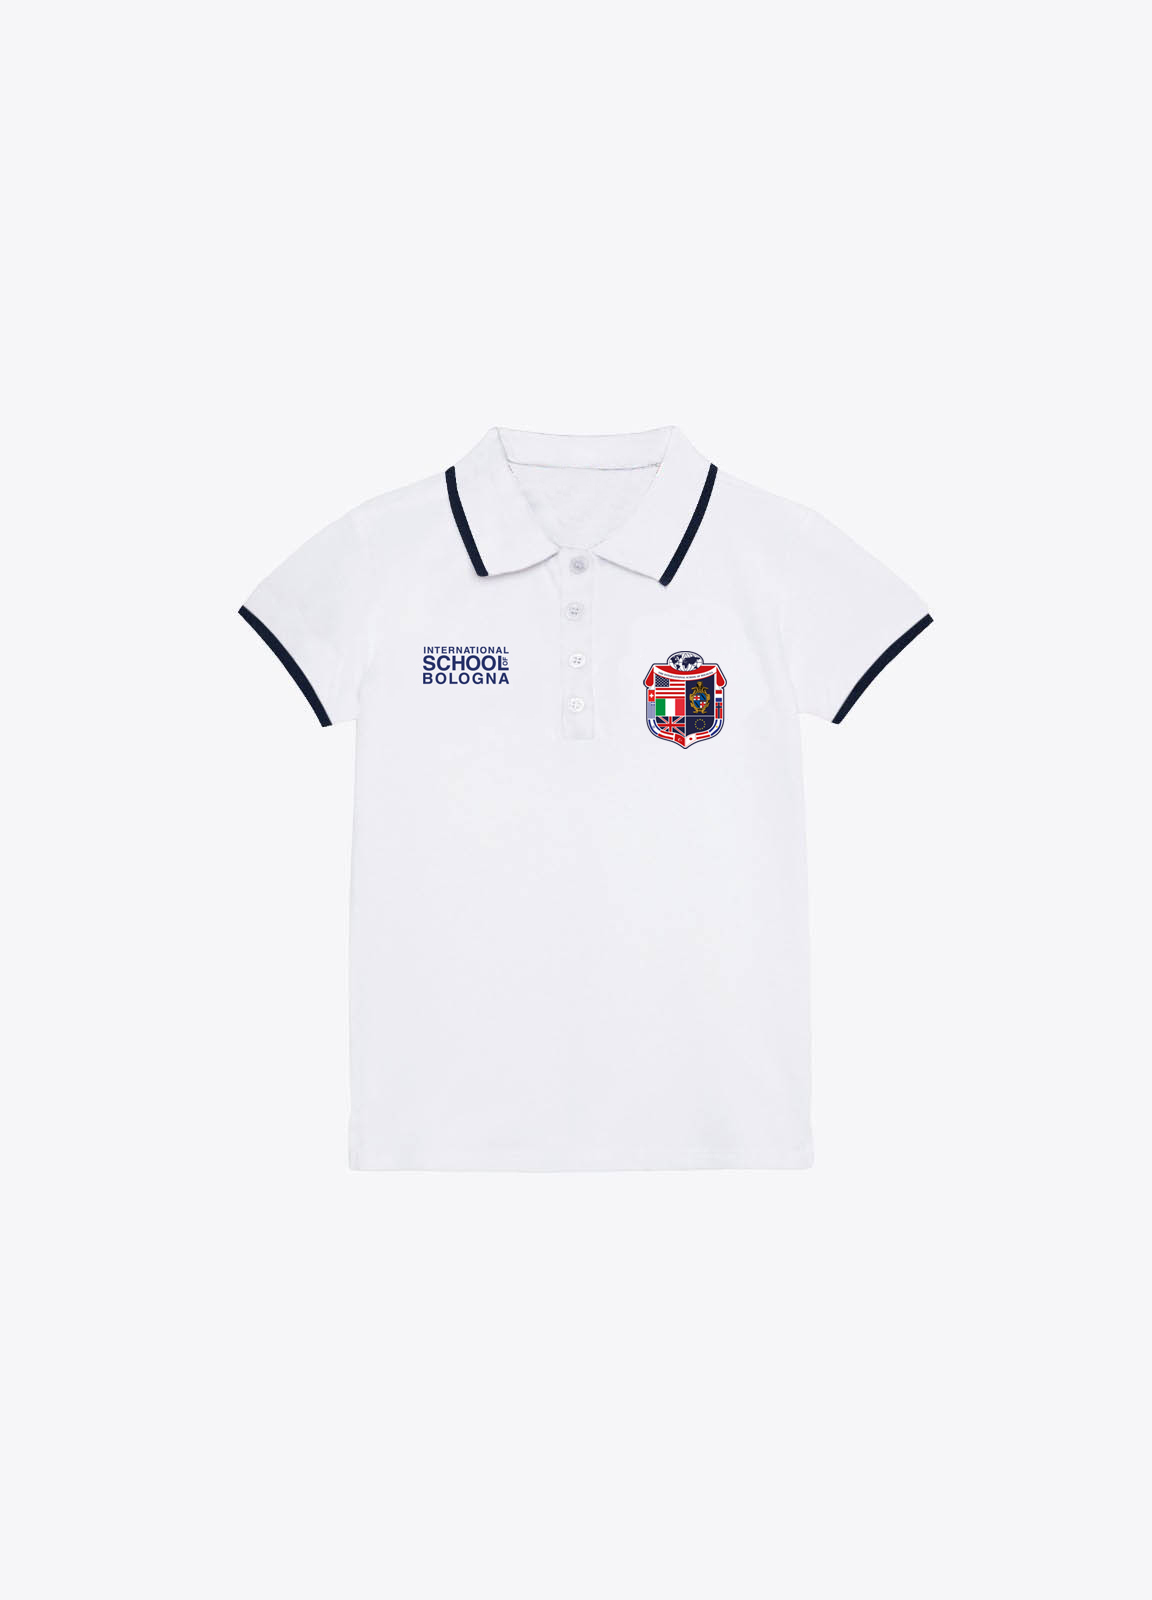 UNISEX - Short sleeves polo shirt with patch and print.